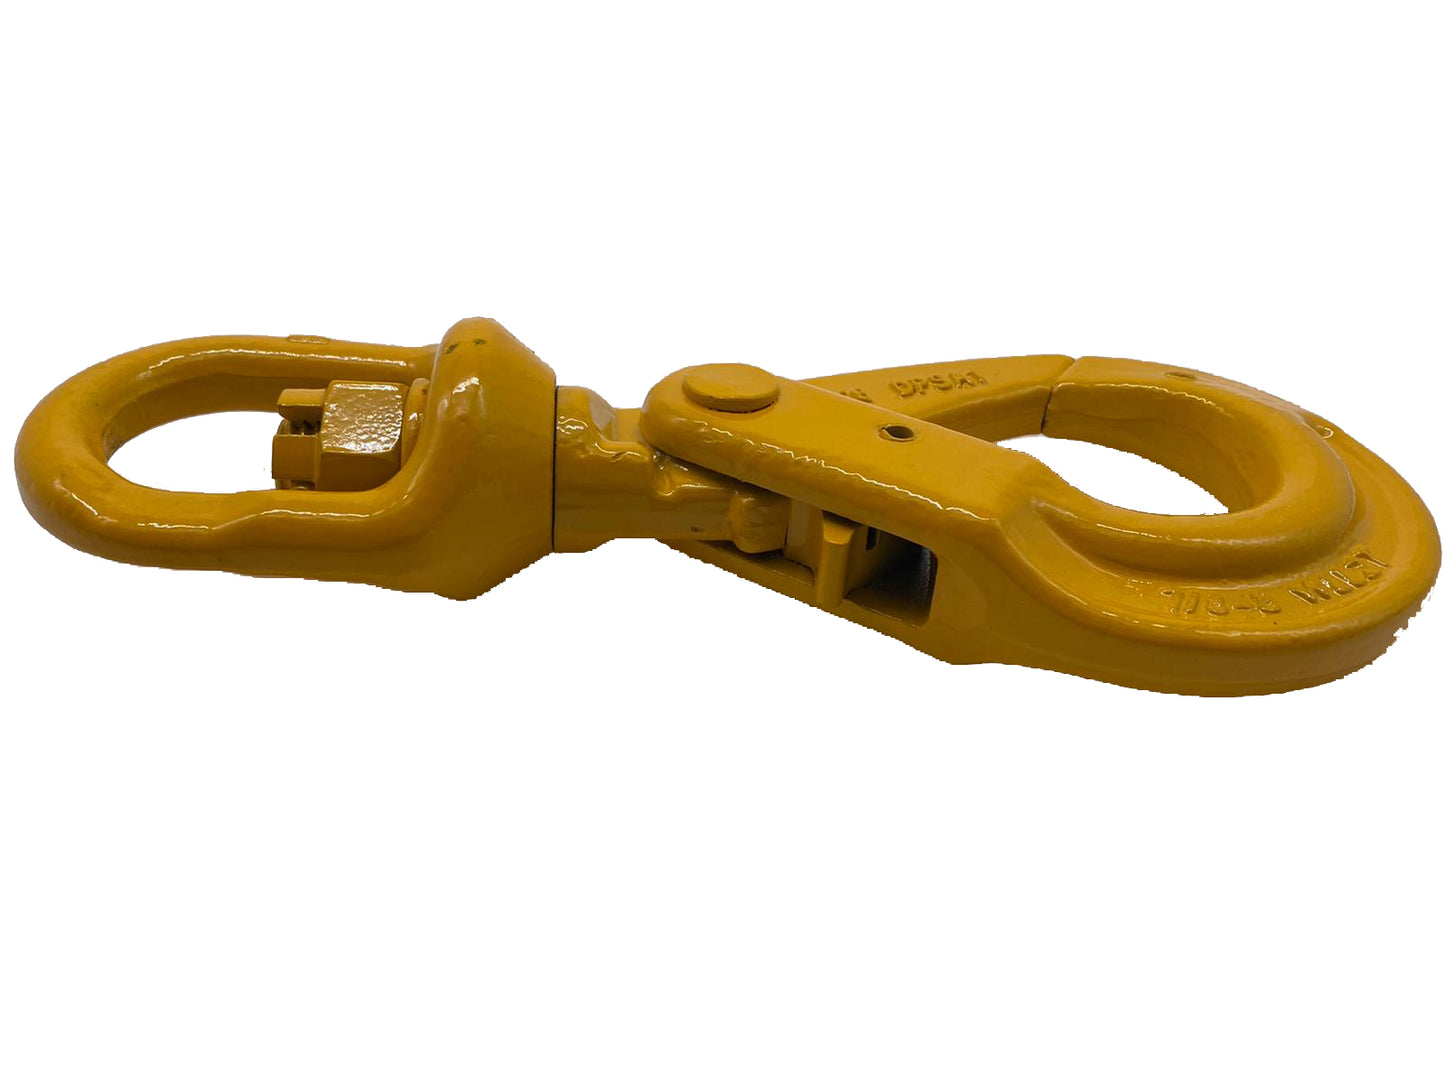 Grade 80 Swivel Auto Lock Hook (285-8) from RiggingUk available next day